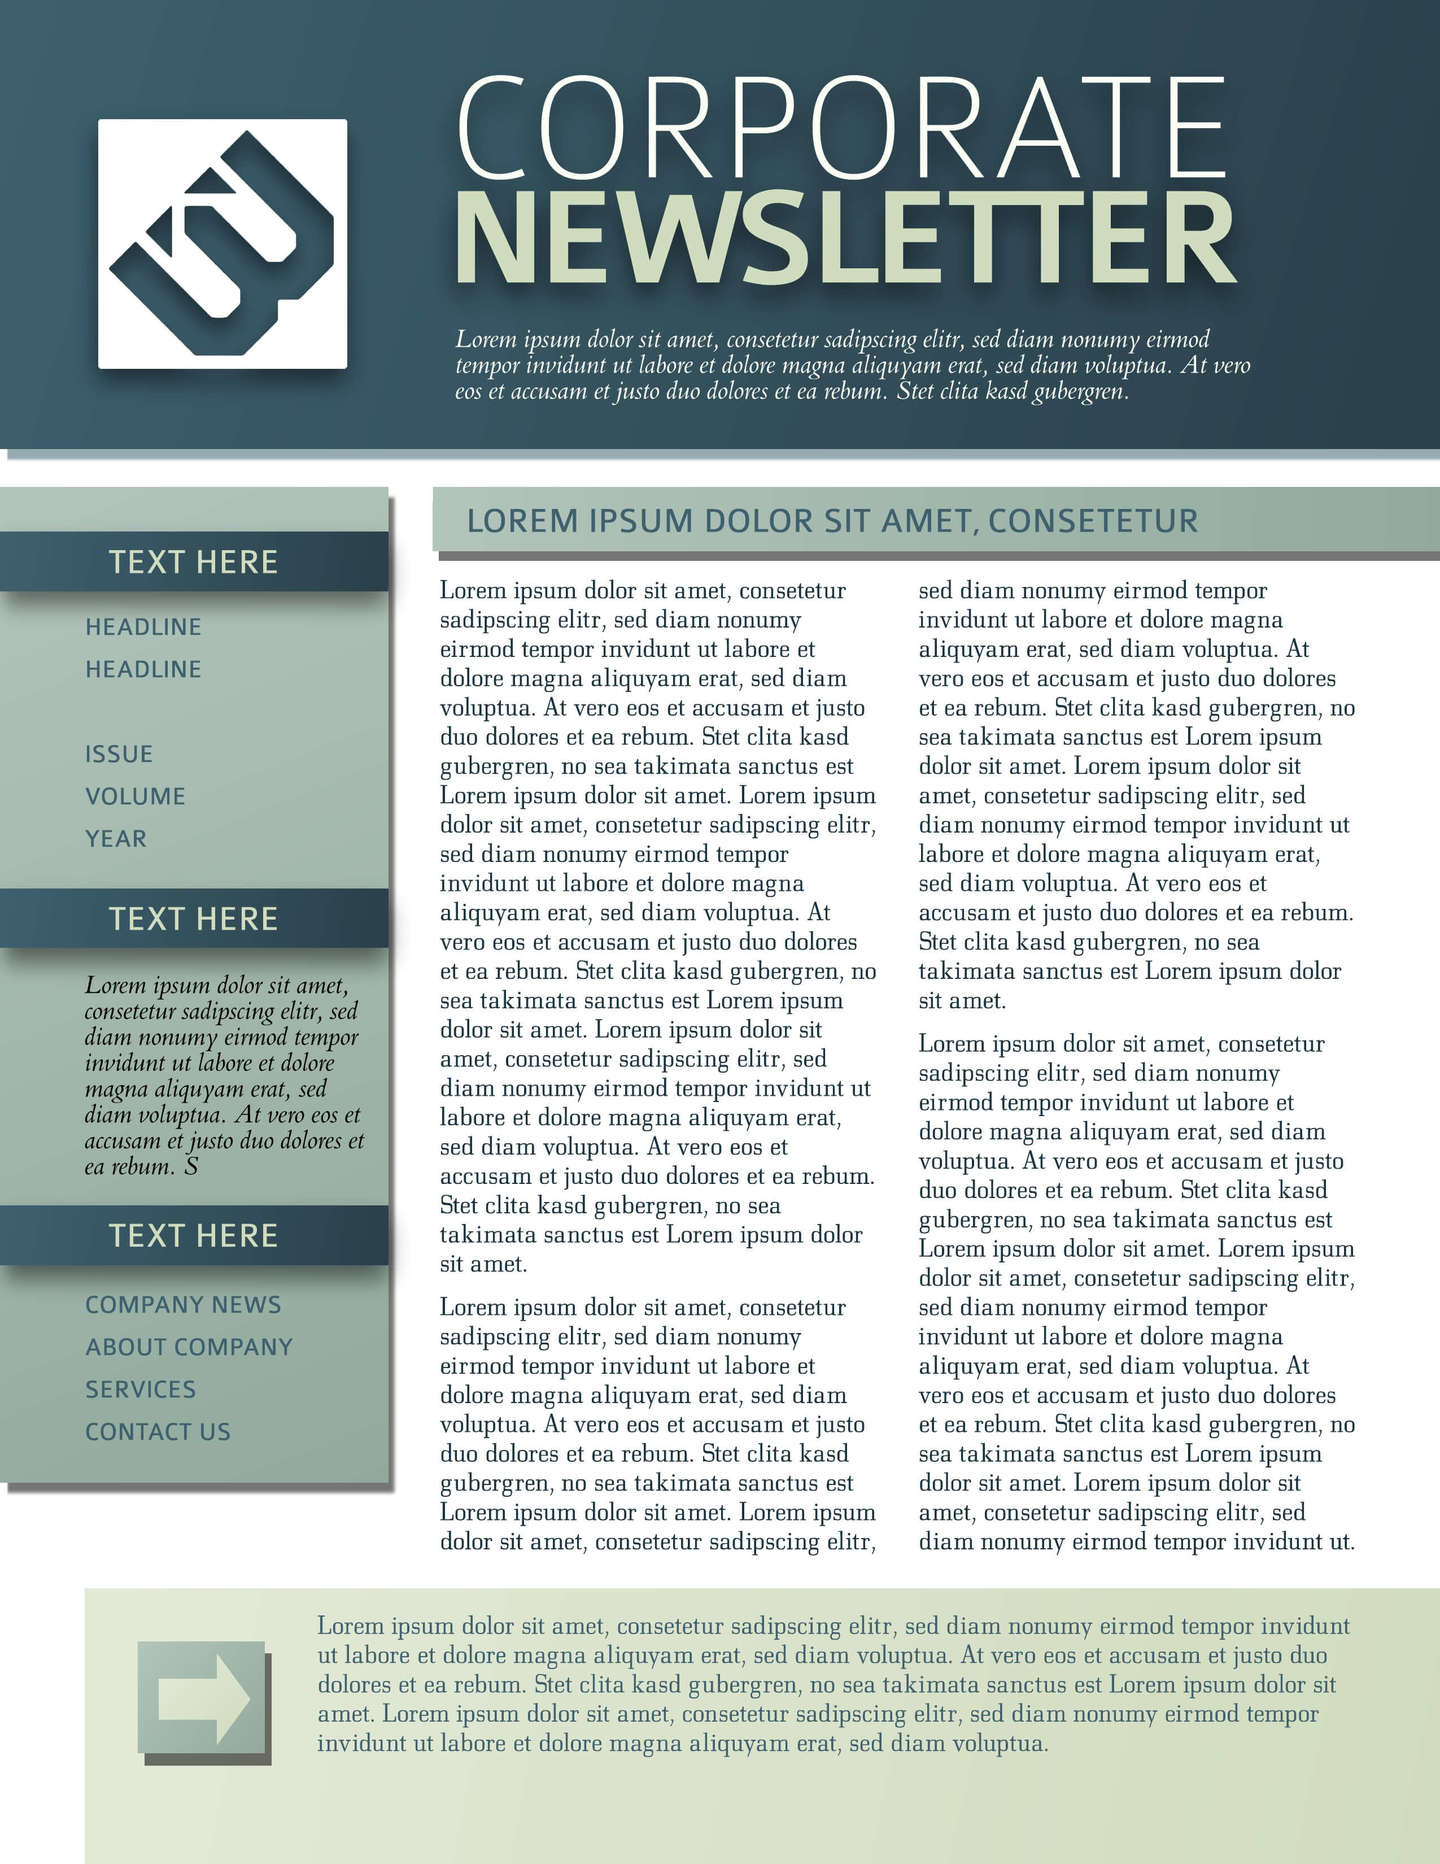 Free Printable Newsletter Templates & Examples | Lucidpress Throughout Newletter Templates